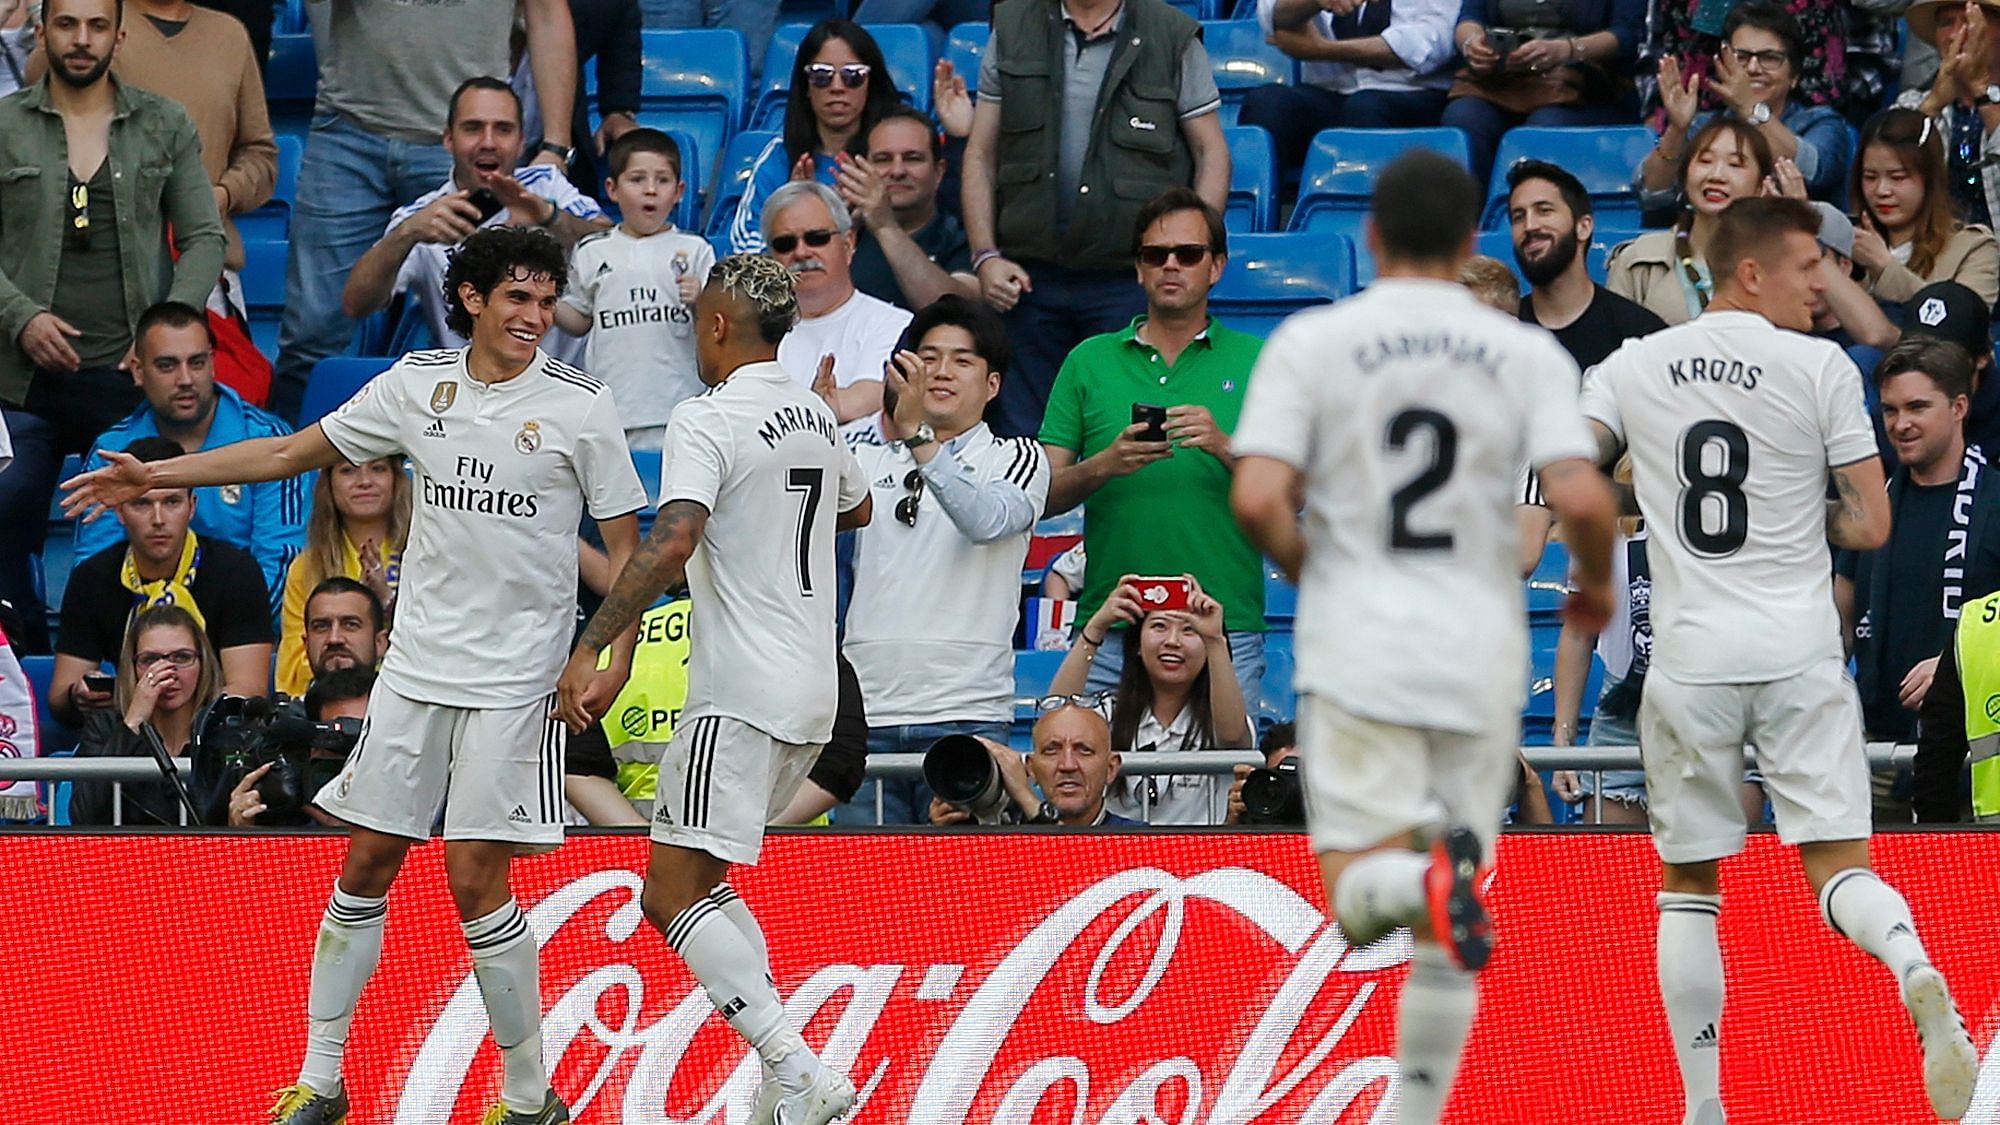 Real Madrid players celebrate a goal against Villarreal.